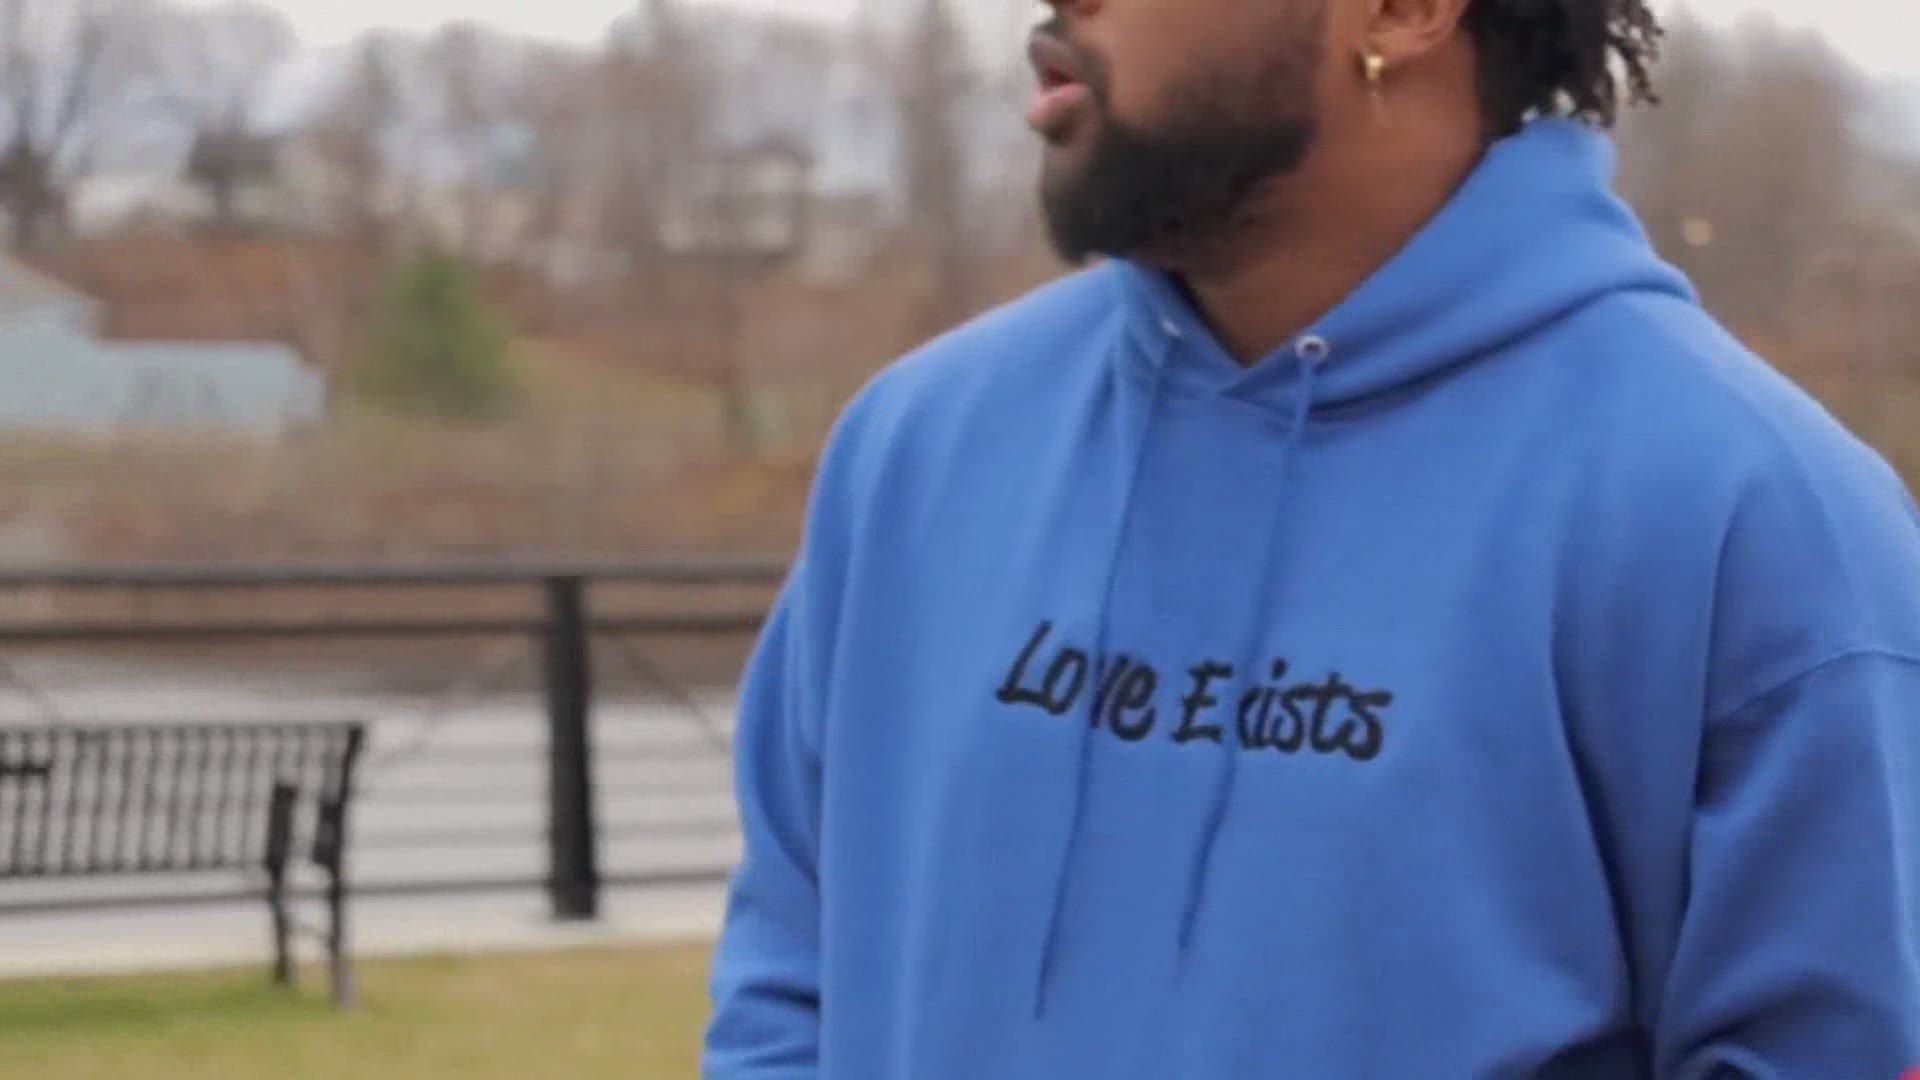 While working on his business degree at Thomas College, LG Fleurine launched a clothing line called Love Exists, stitching together a powerful message.